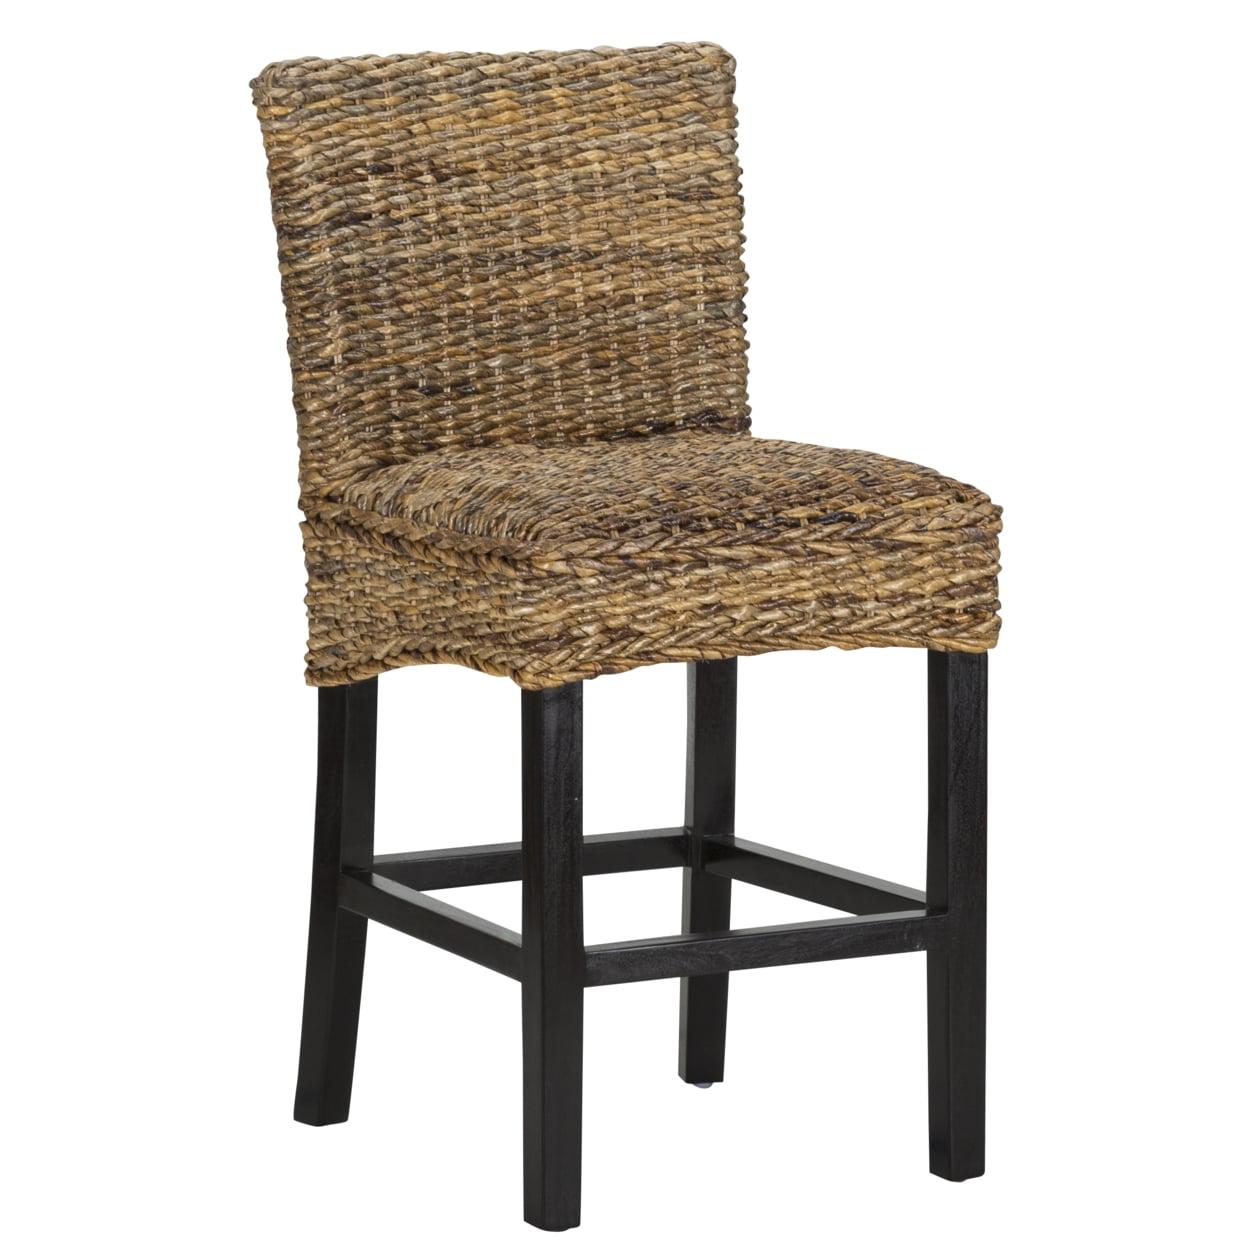 Rustic Rattan Handwoven Counter Stool with Mahogany Legs